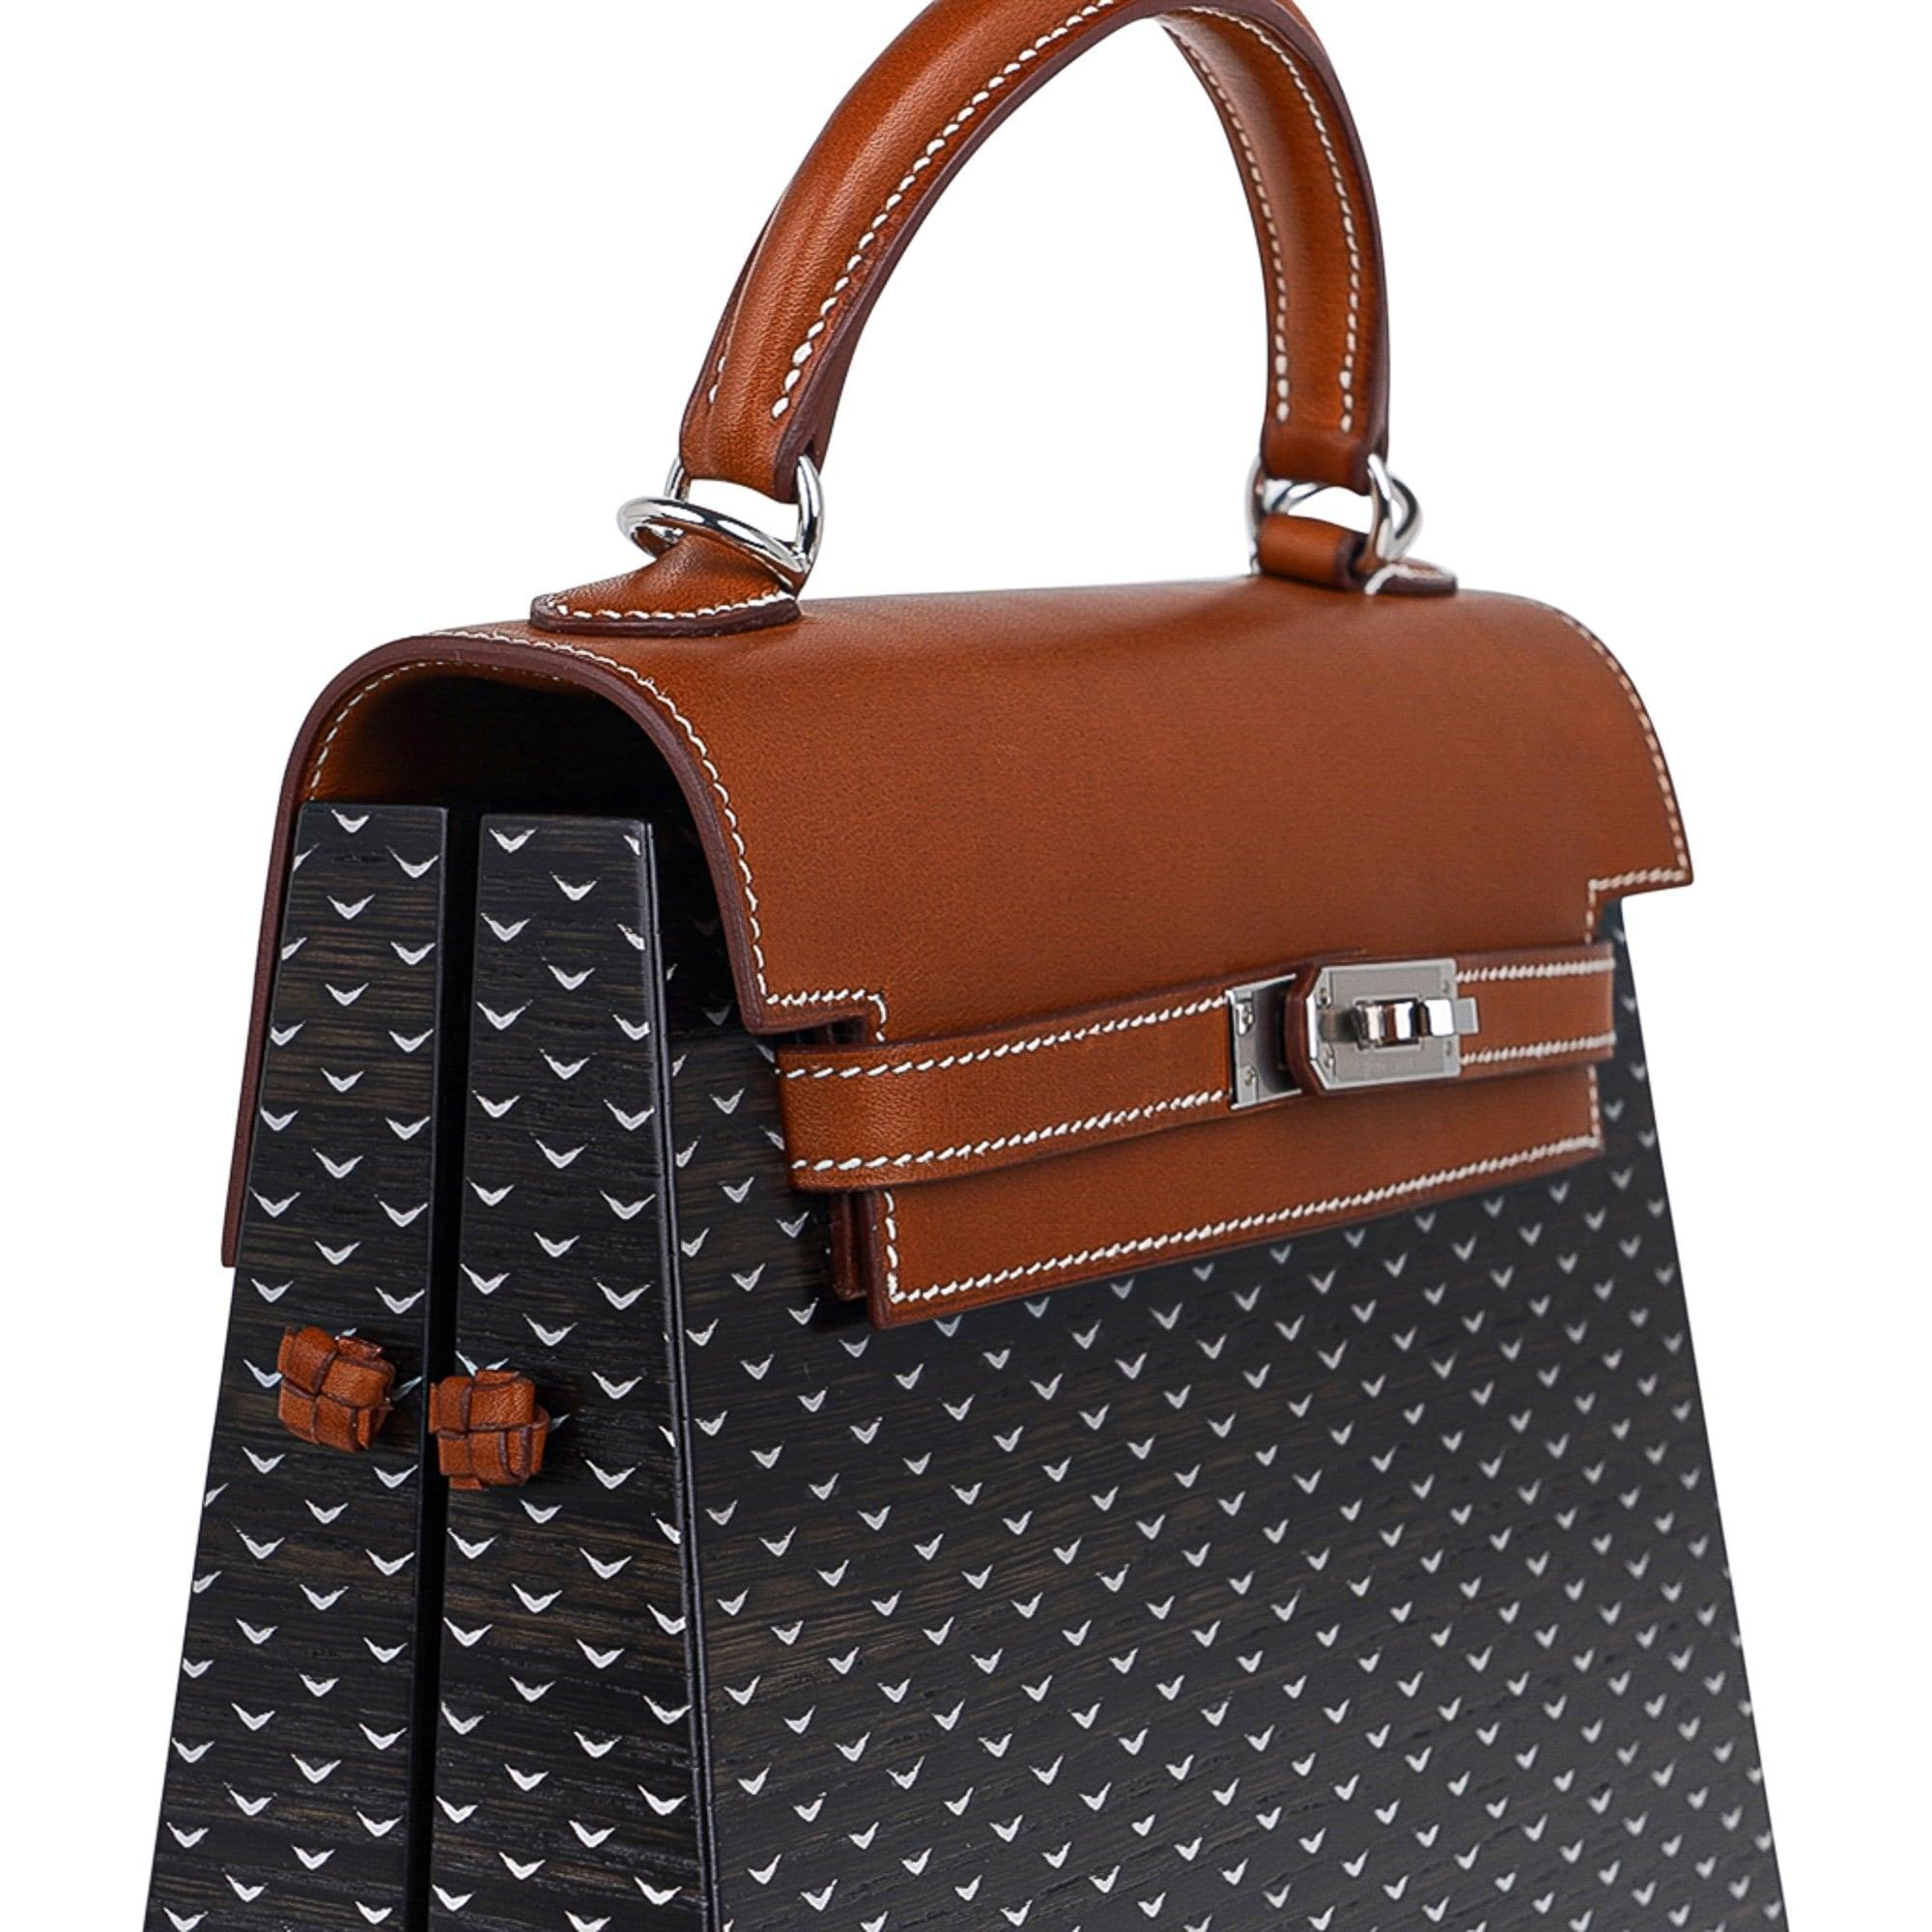 Hermes Limited Edition Kellywood 22 Bag in Wood with Aluminum and Barenia Leather Palladium Hardware